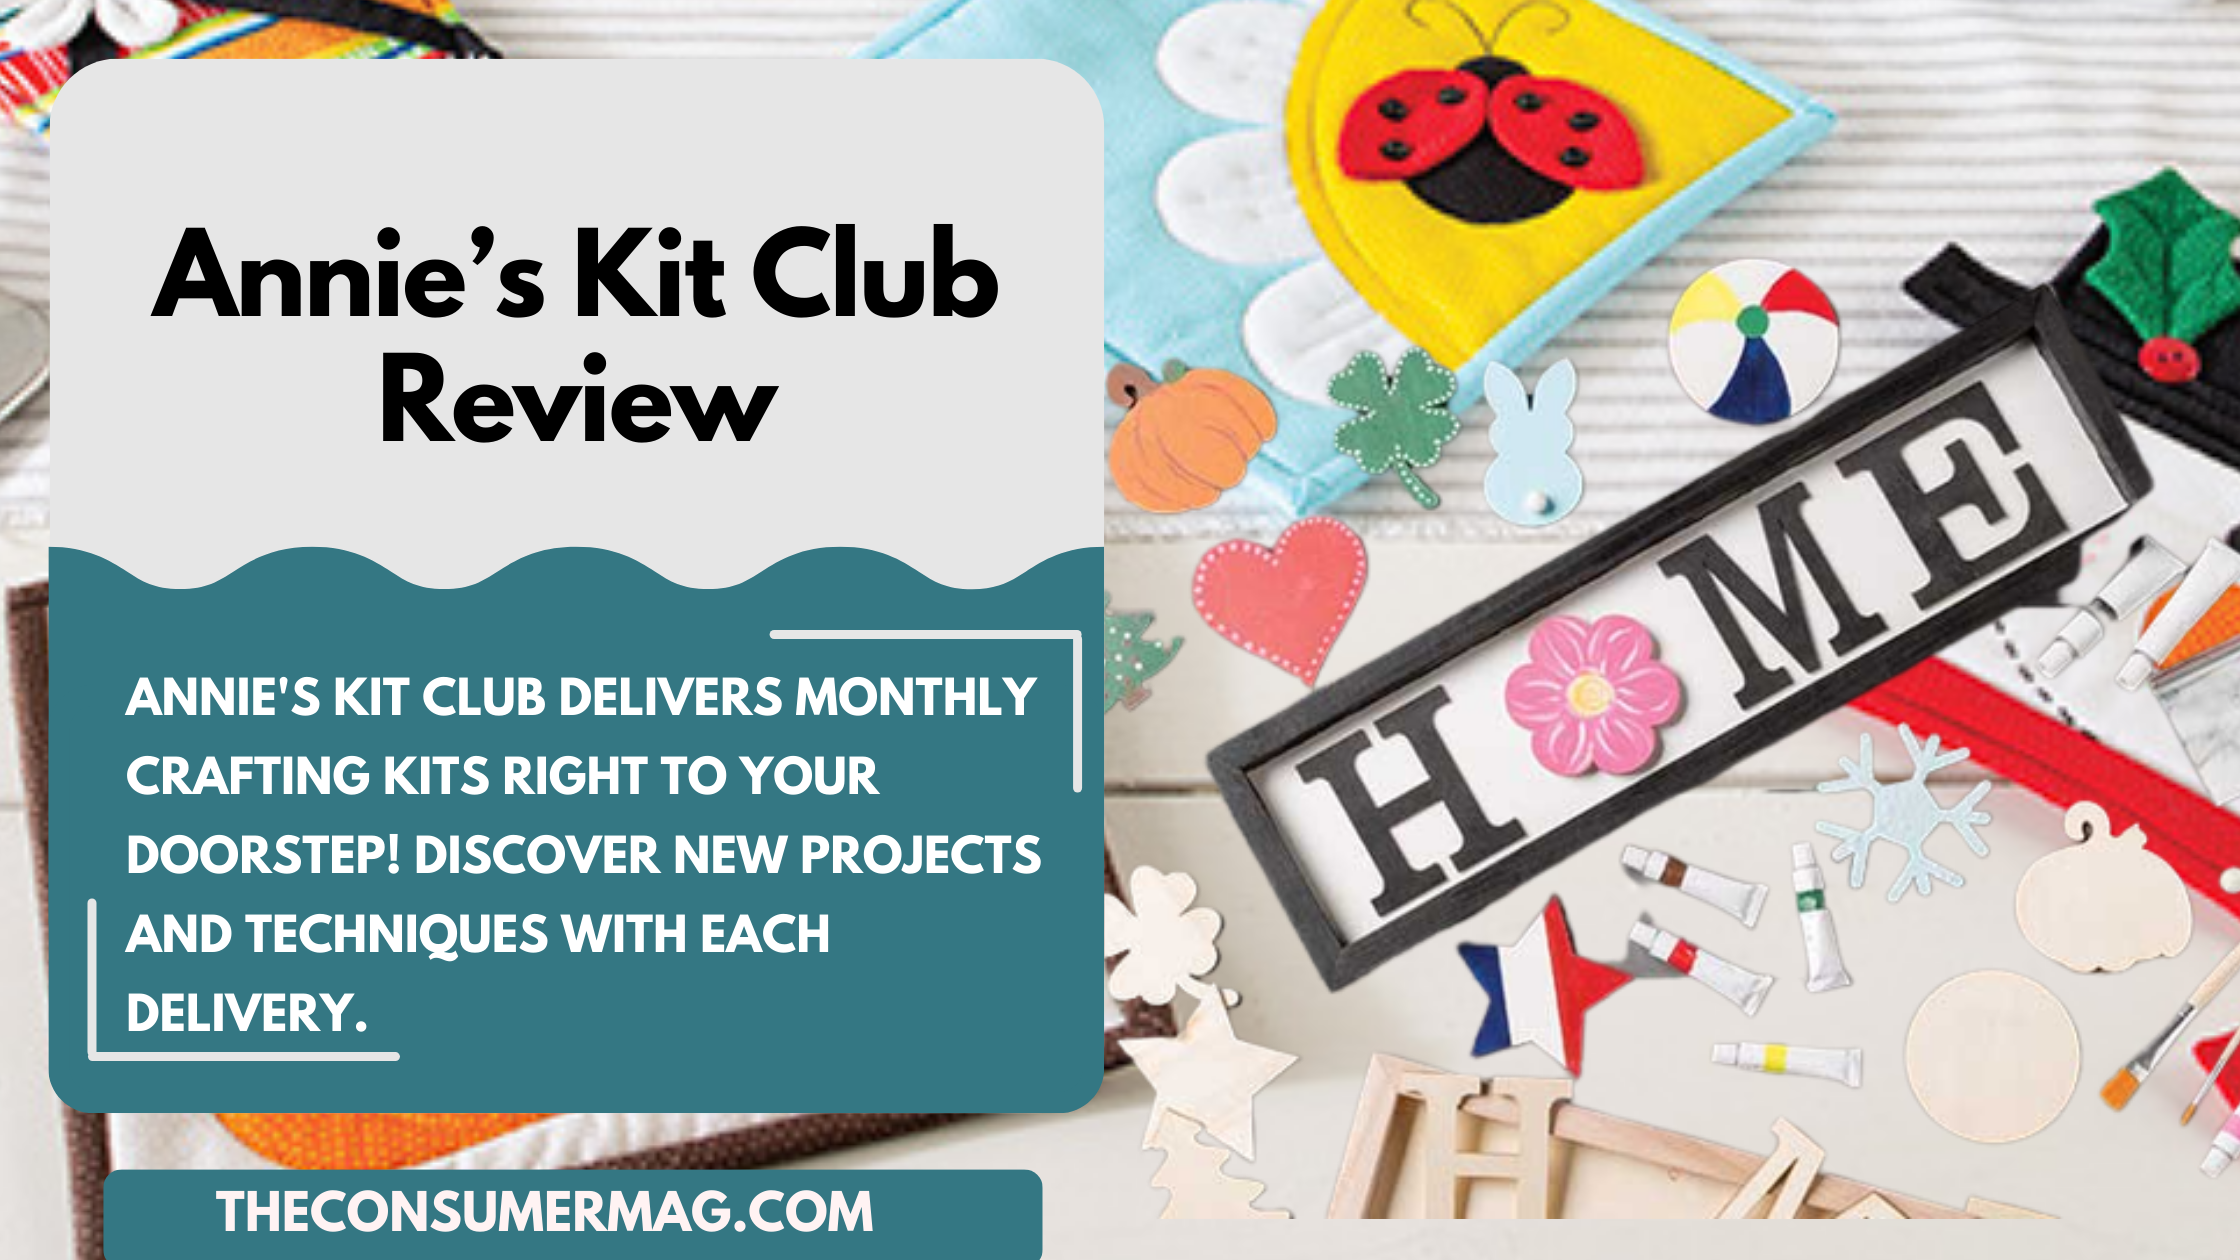 Annie’s Kit Club Featured Image